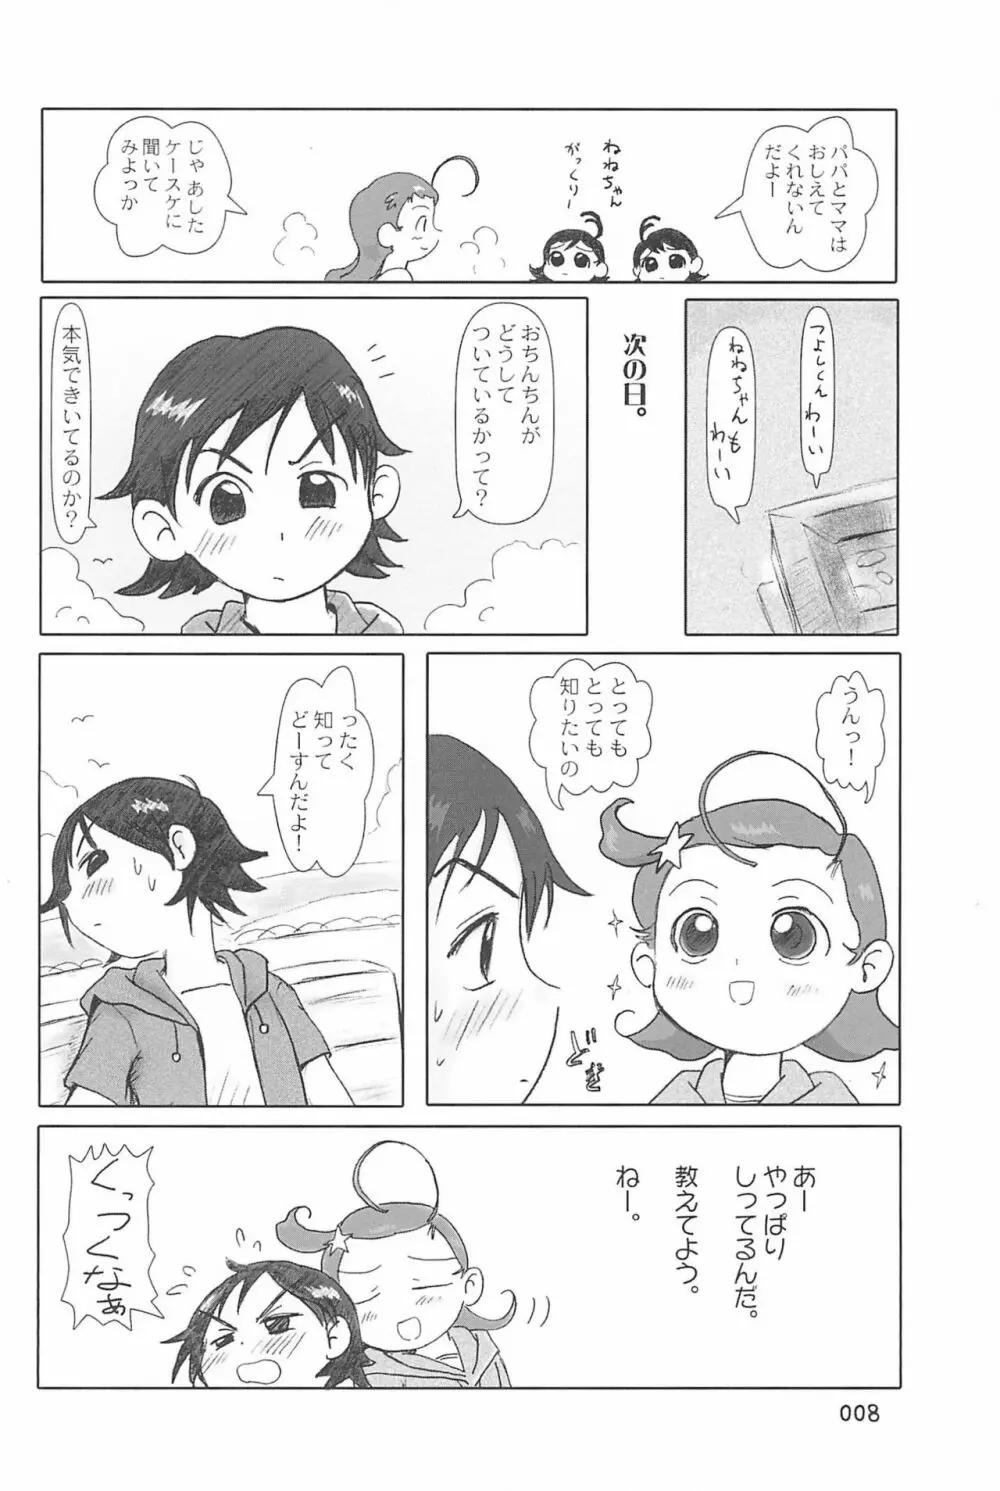 ND-special Volume 4 8ページ